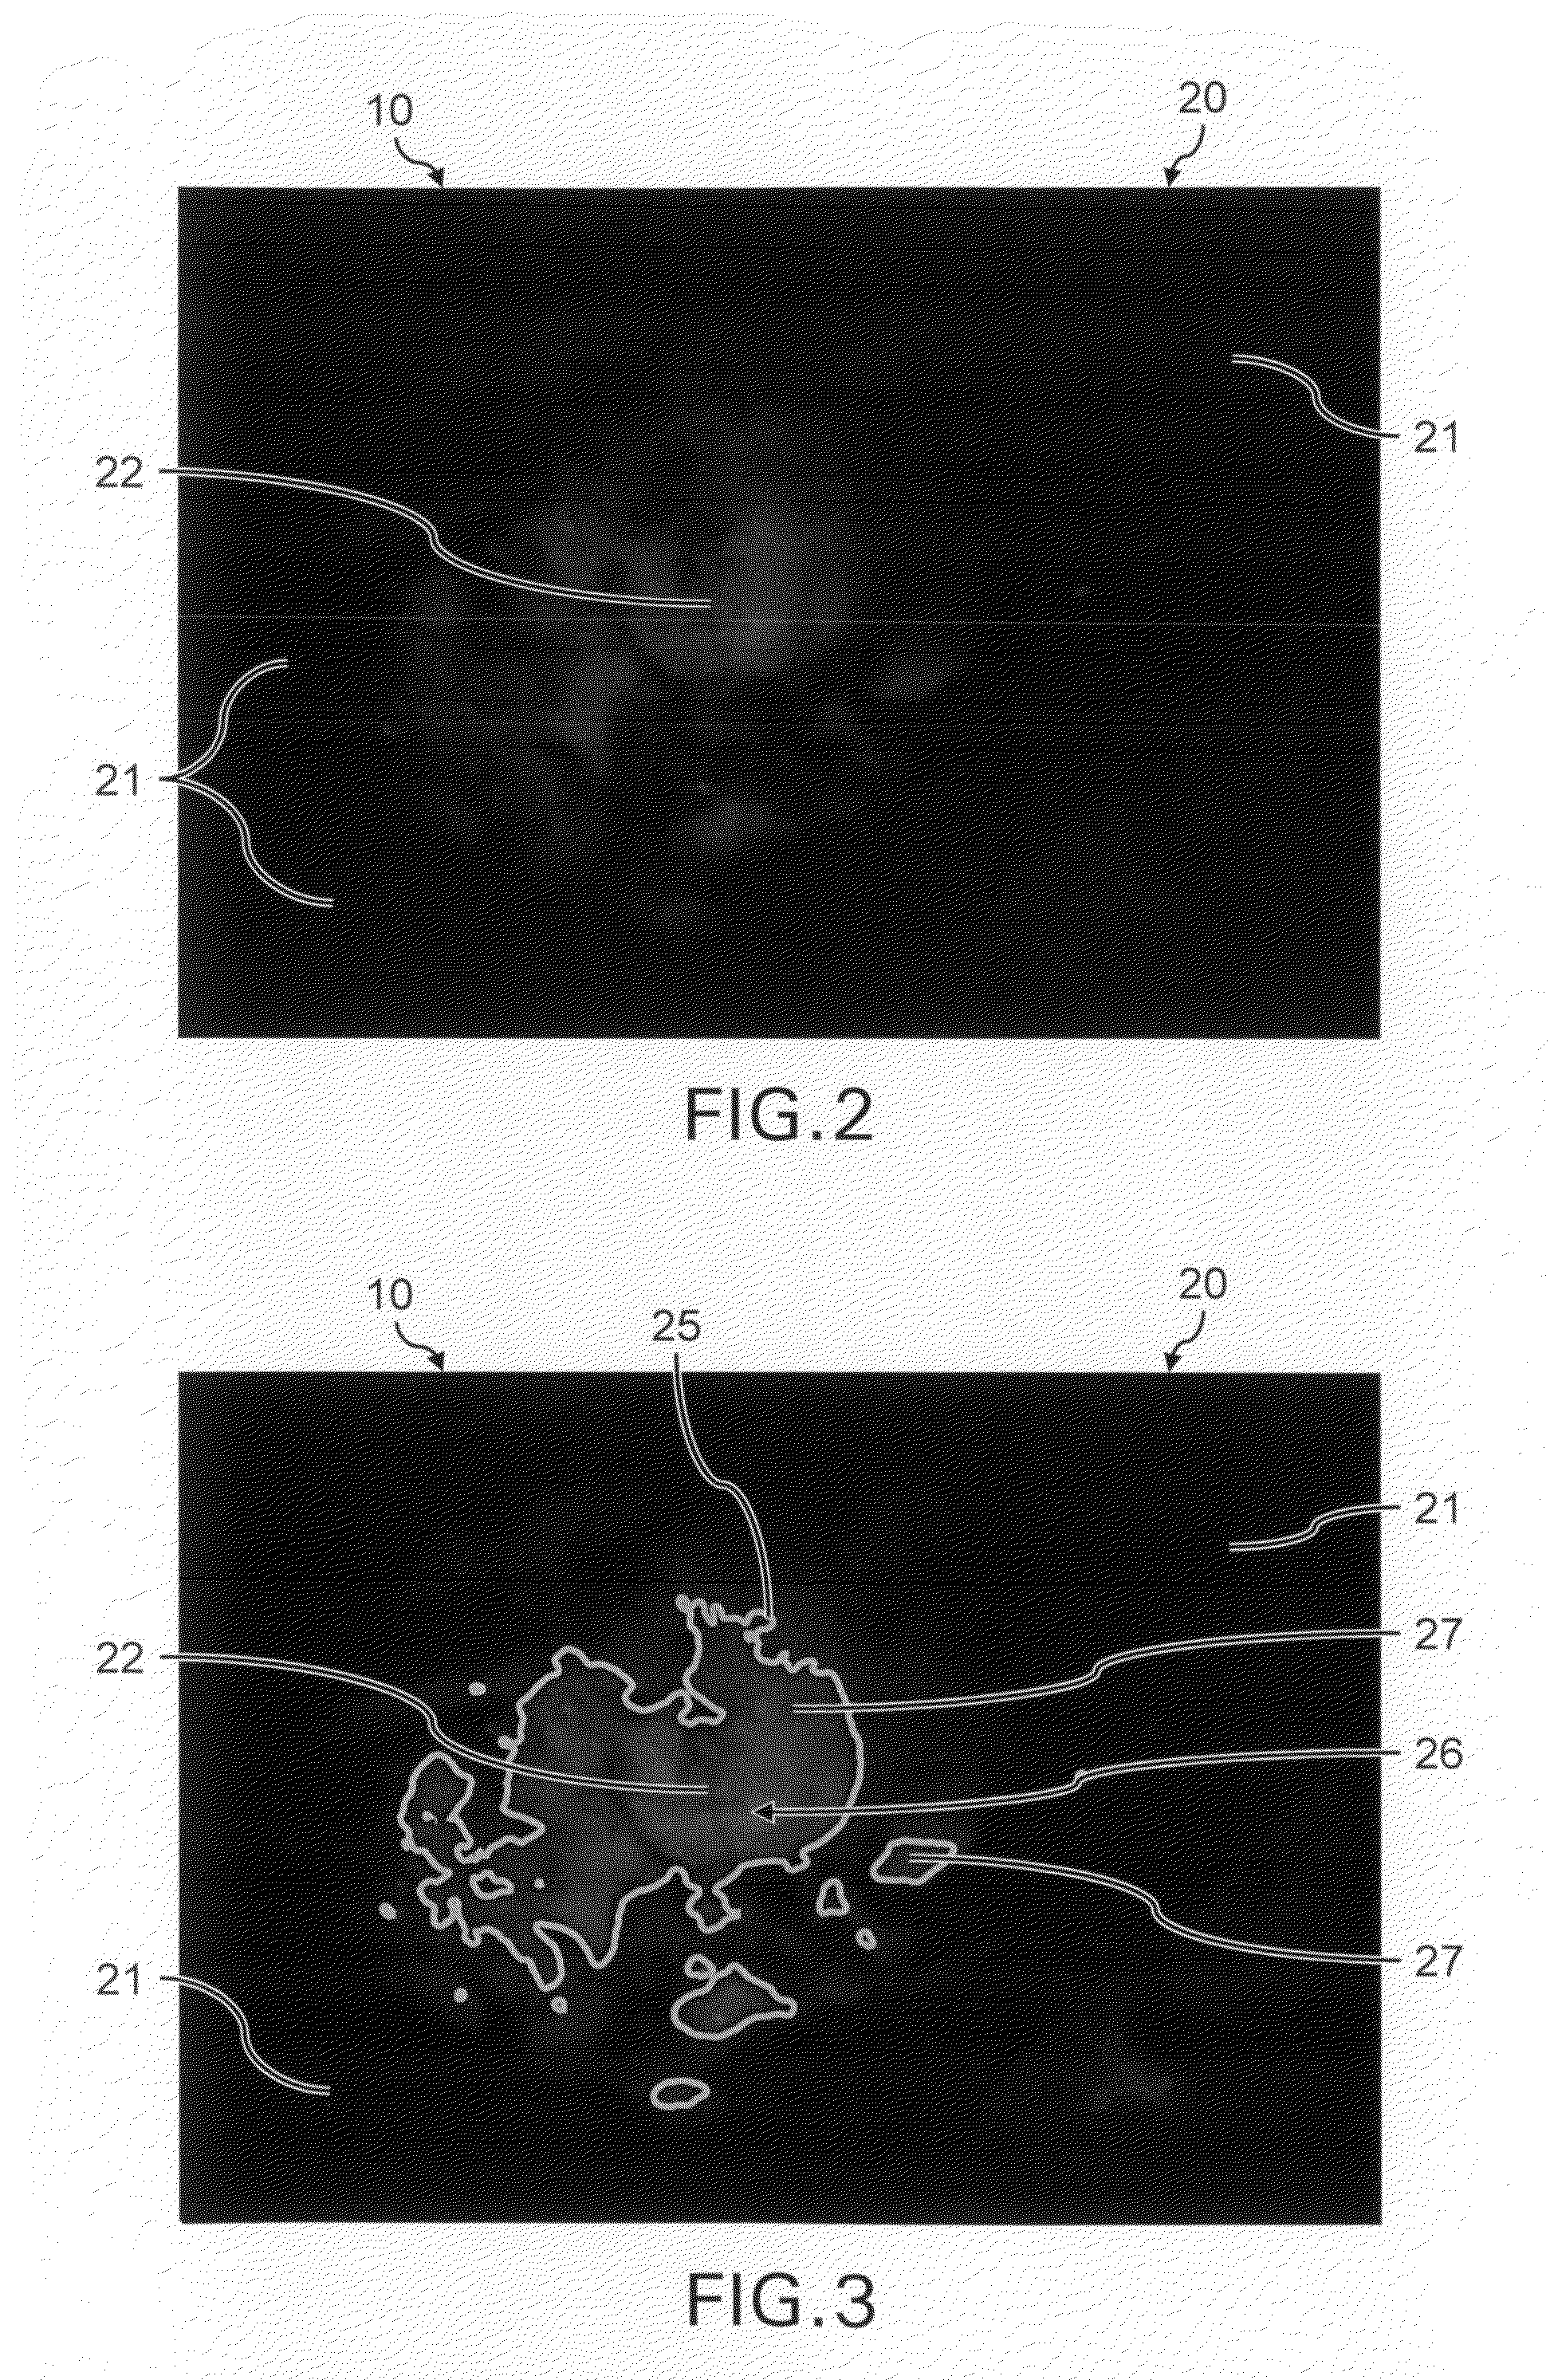 Method for analyzing and processing fluorescent images